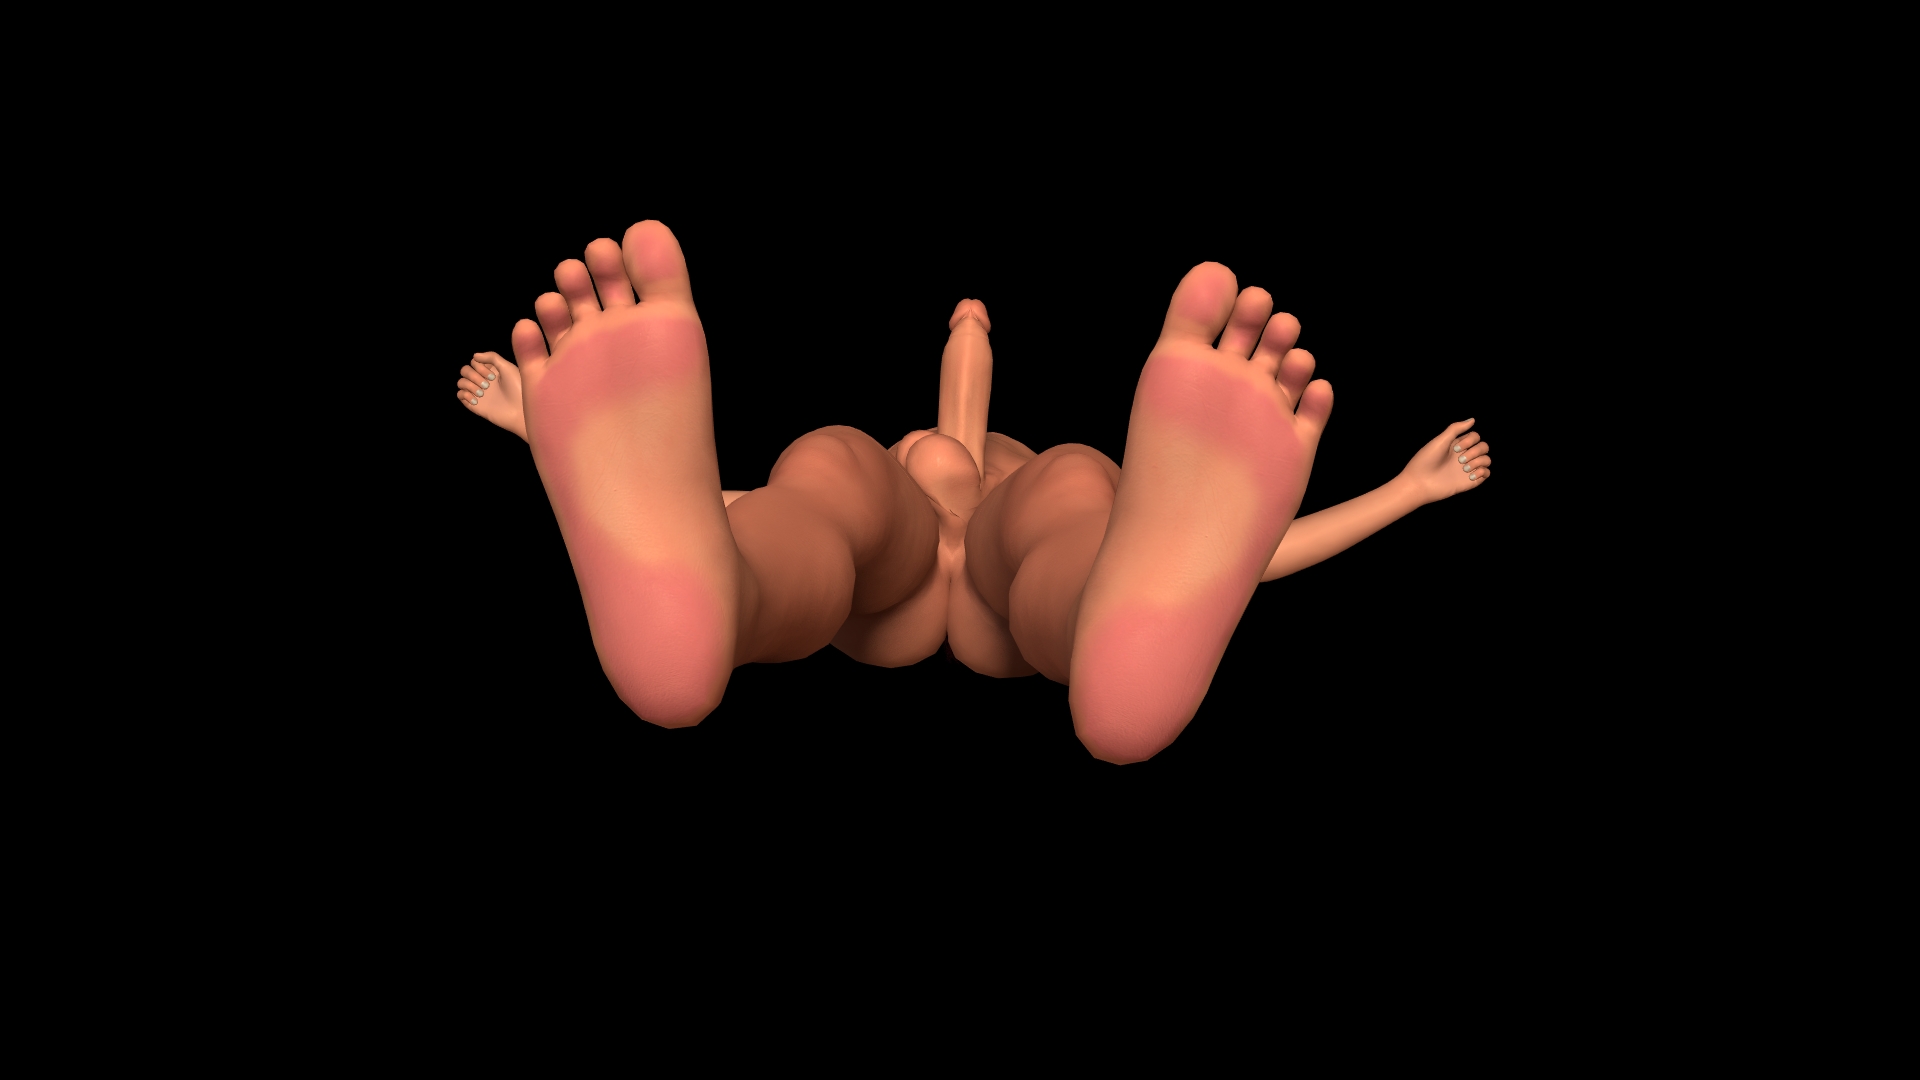 Textures - Futa and Male Feet Red Slap On Texture | Virt-A-Mate Hub